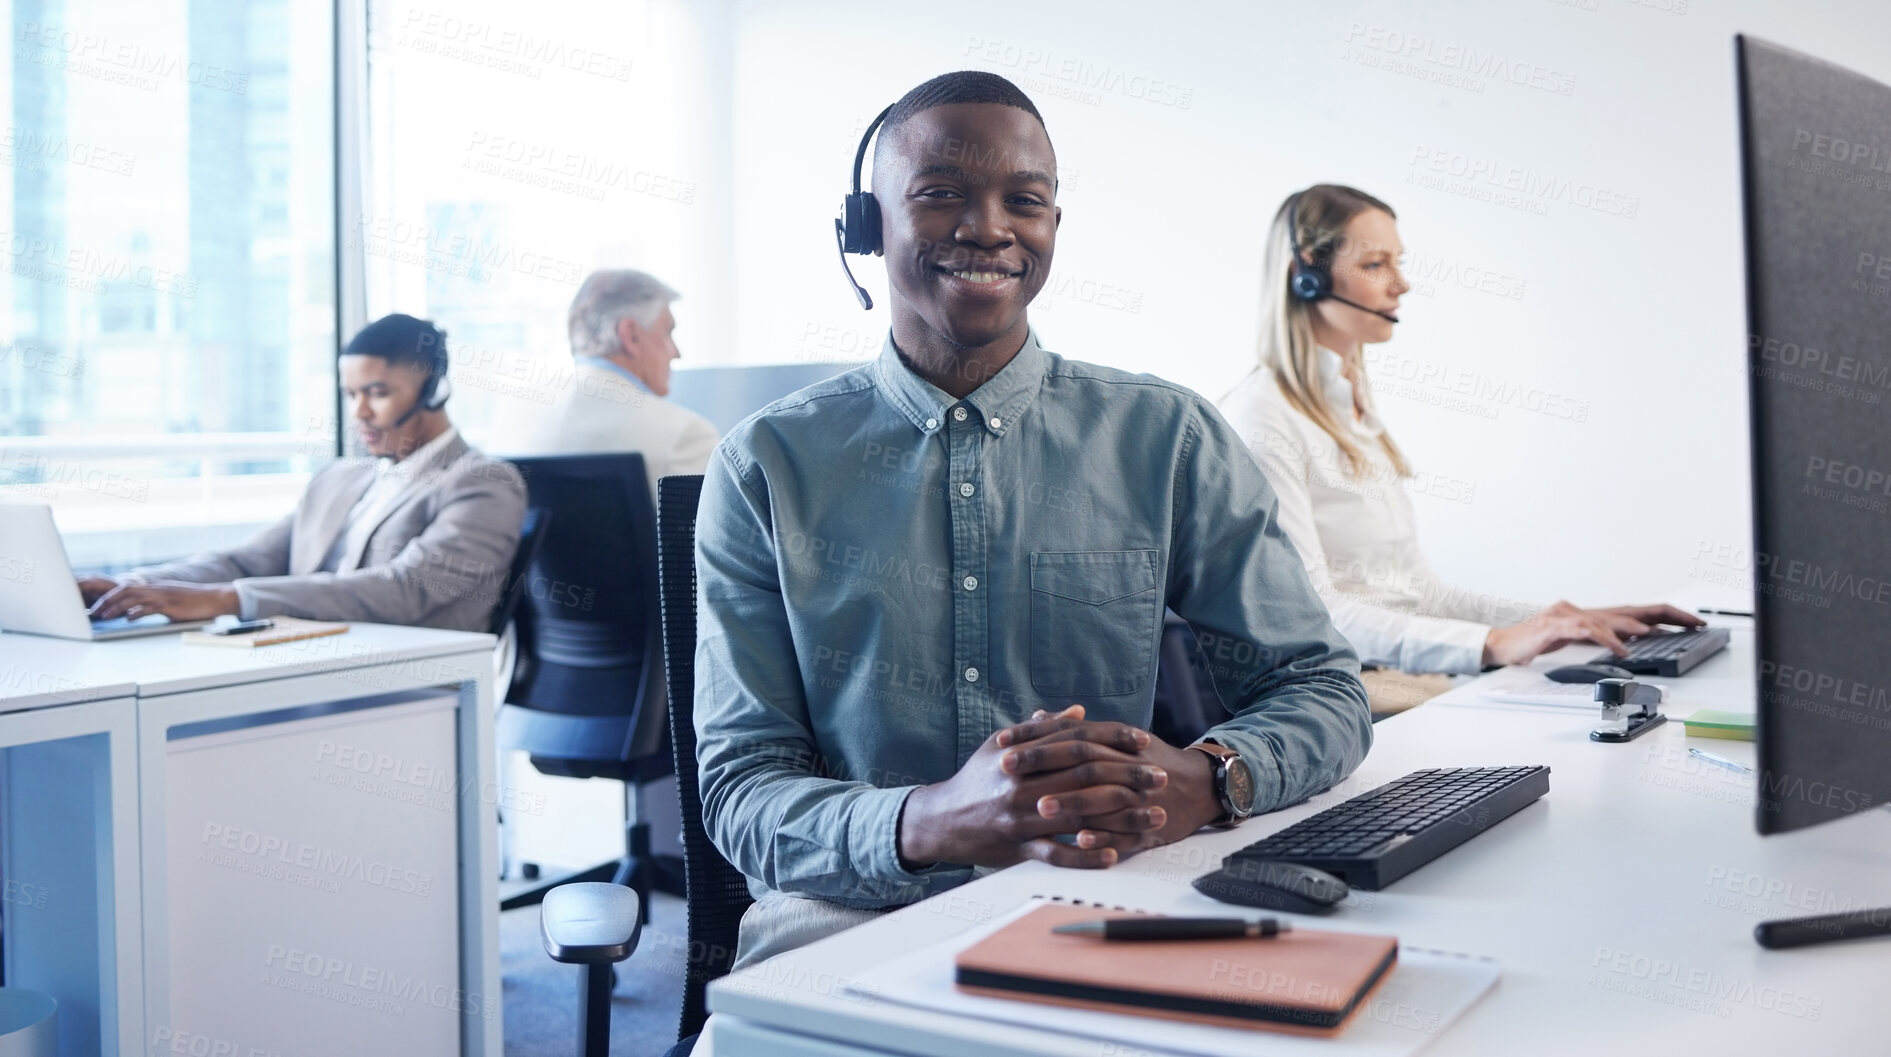 Buy stock photo Portrait of a young businessman using a headset and computer in a modern office